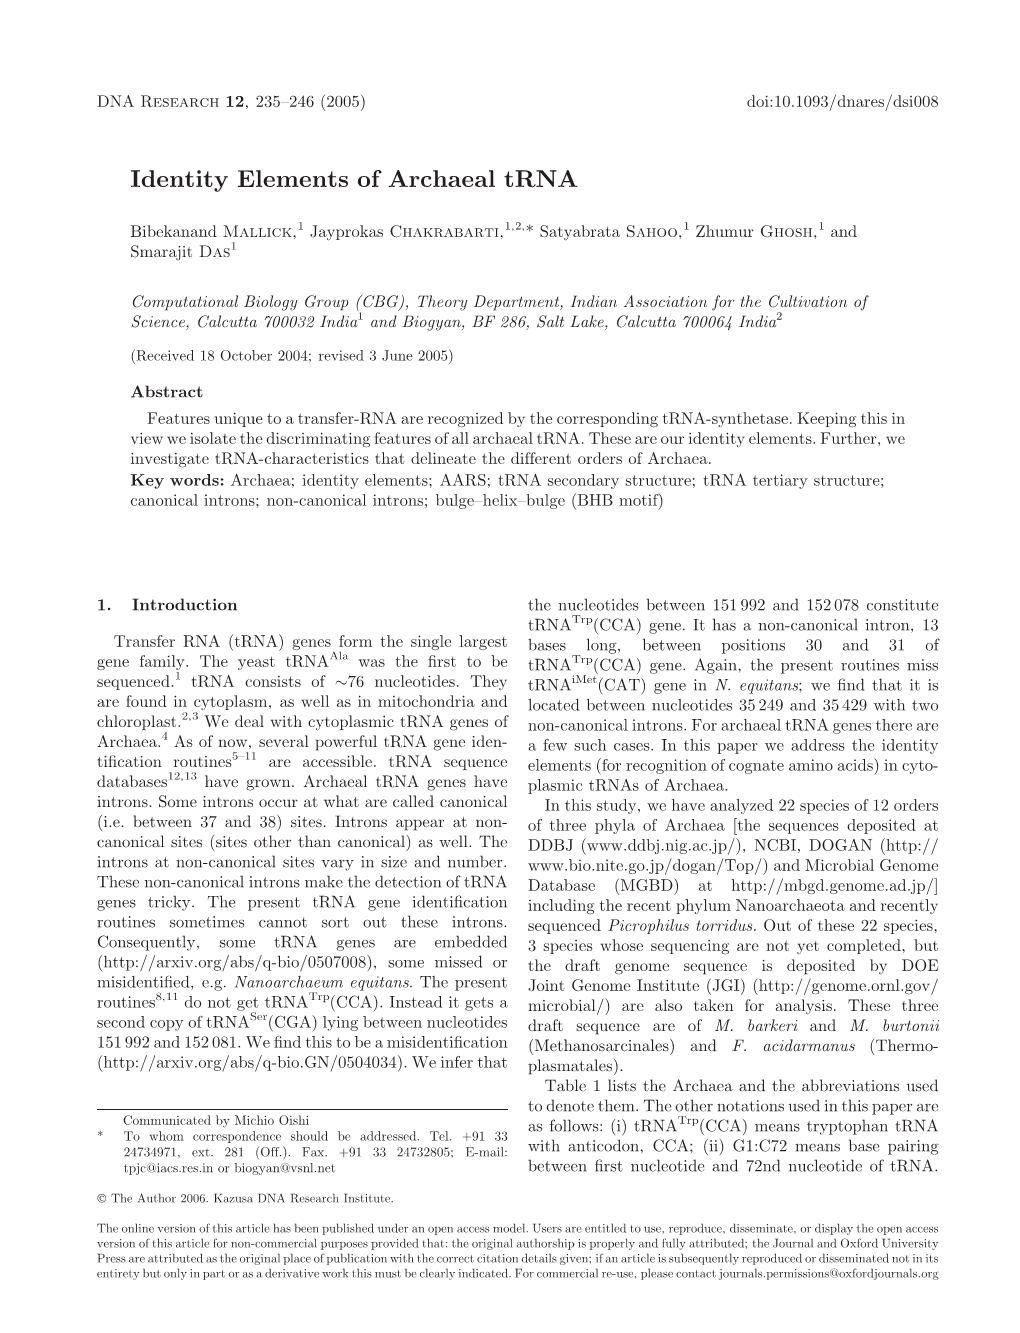 Identity Elements of Archaeal Trna